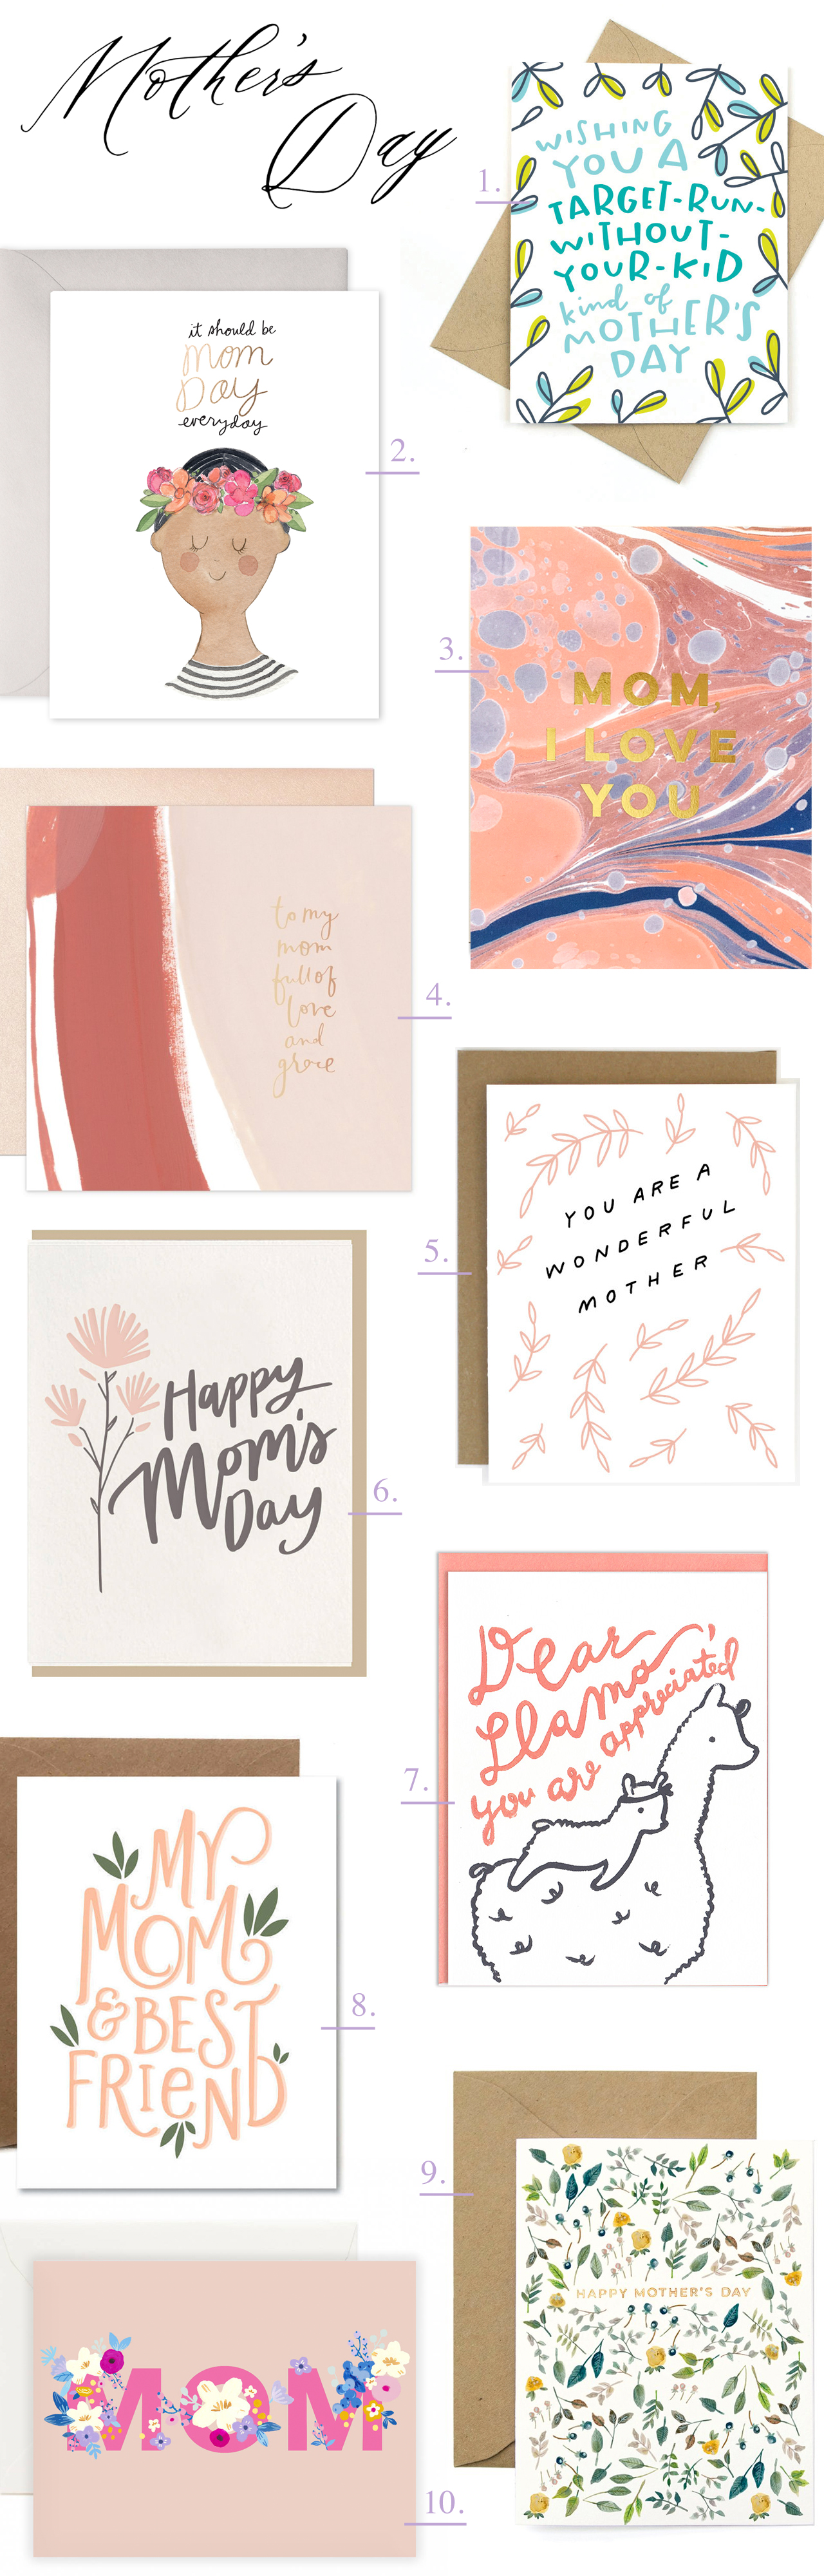 Ten Awesome Mother's Day Cards